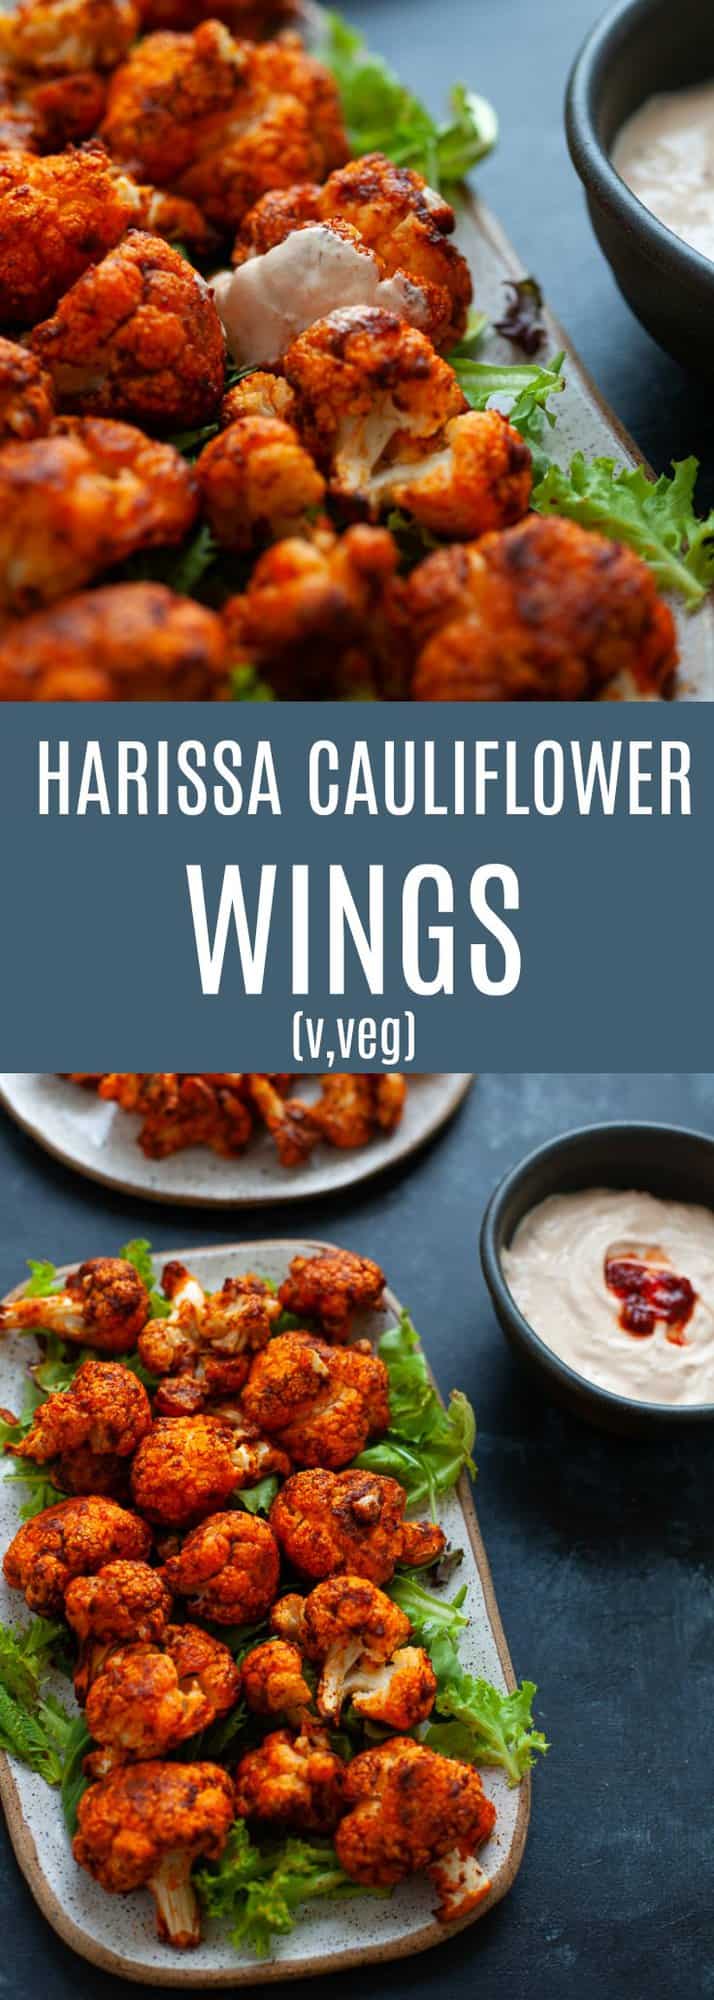 Spicy, smoky and totally satisfying, these harissa cauliflower wings are about to blow your mind. #vegetarian #harissa #middleeastern #vegan